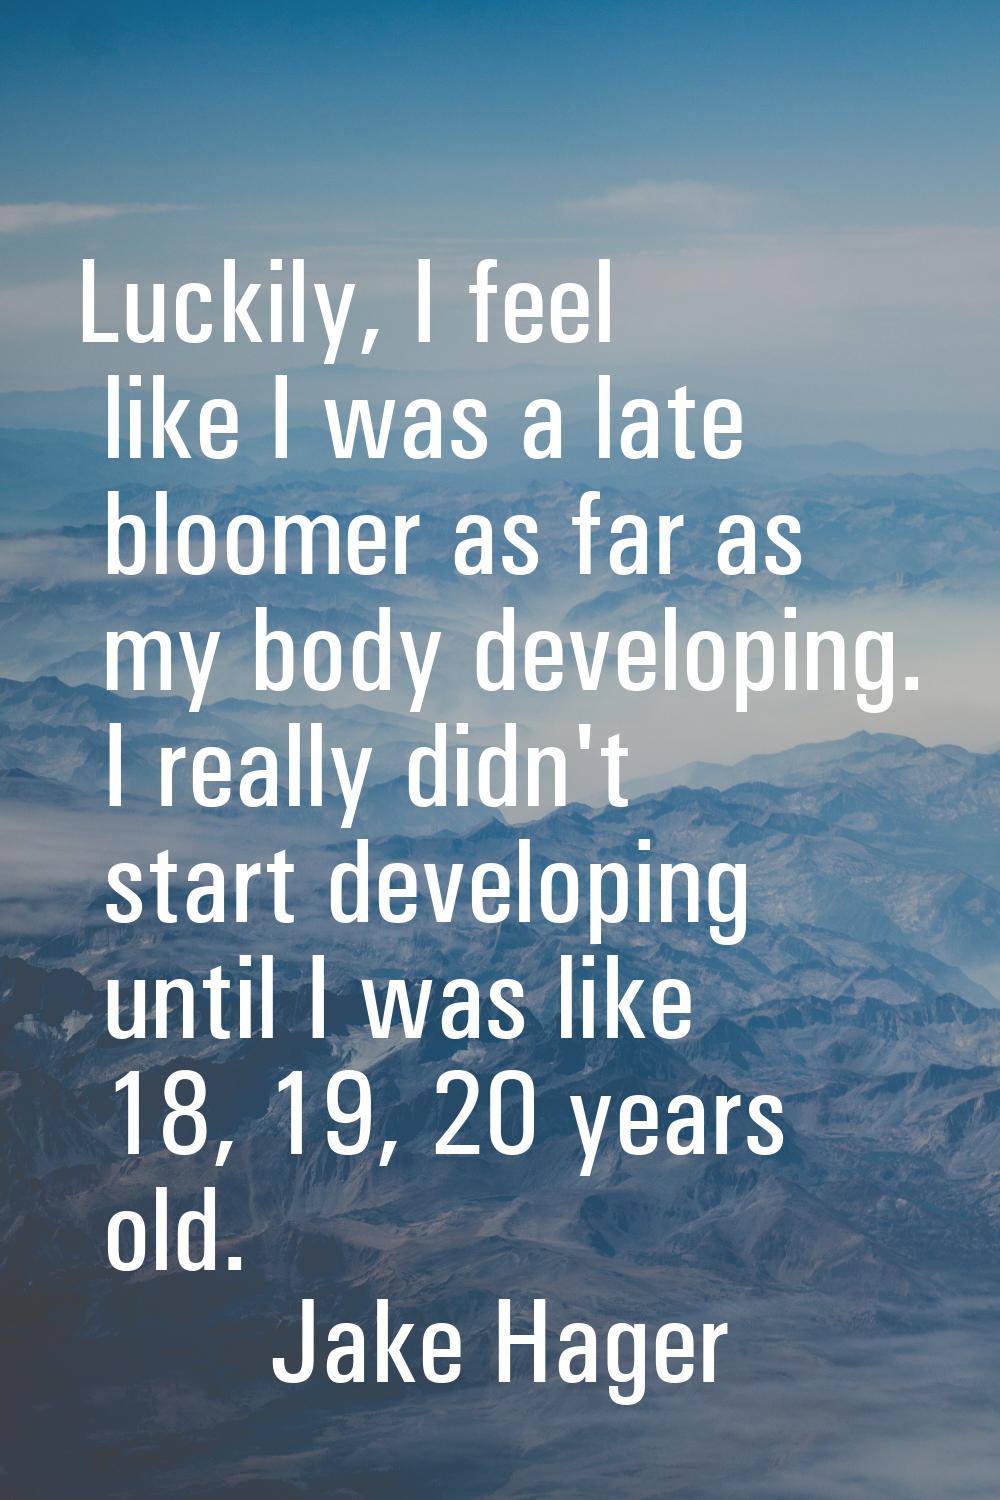 Luckily, I feel like I was a late bloomer as far as my body developing. I really didn't start devel